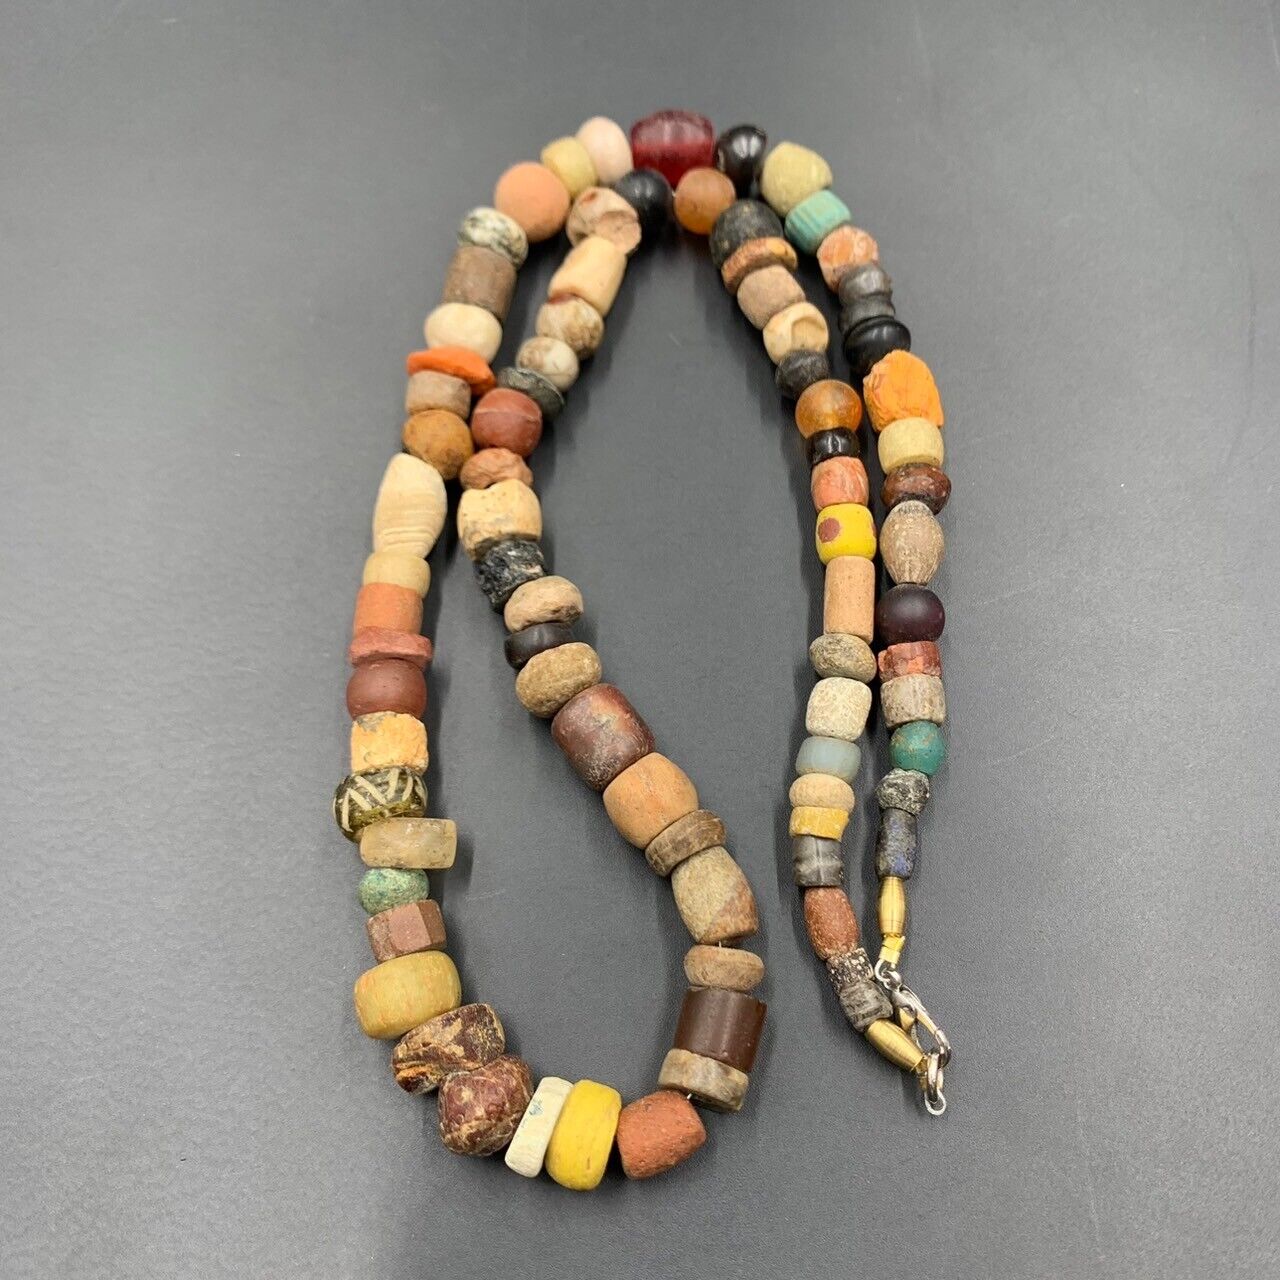 Ancient Old Mix Stone With Few Ancient Glass Beads Necklace, Antique Beads Mala